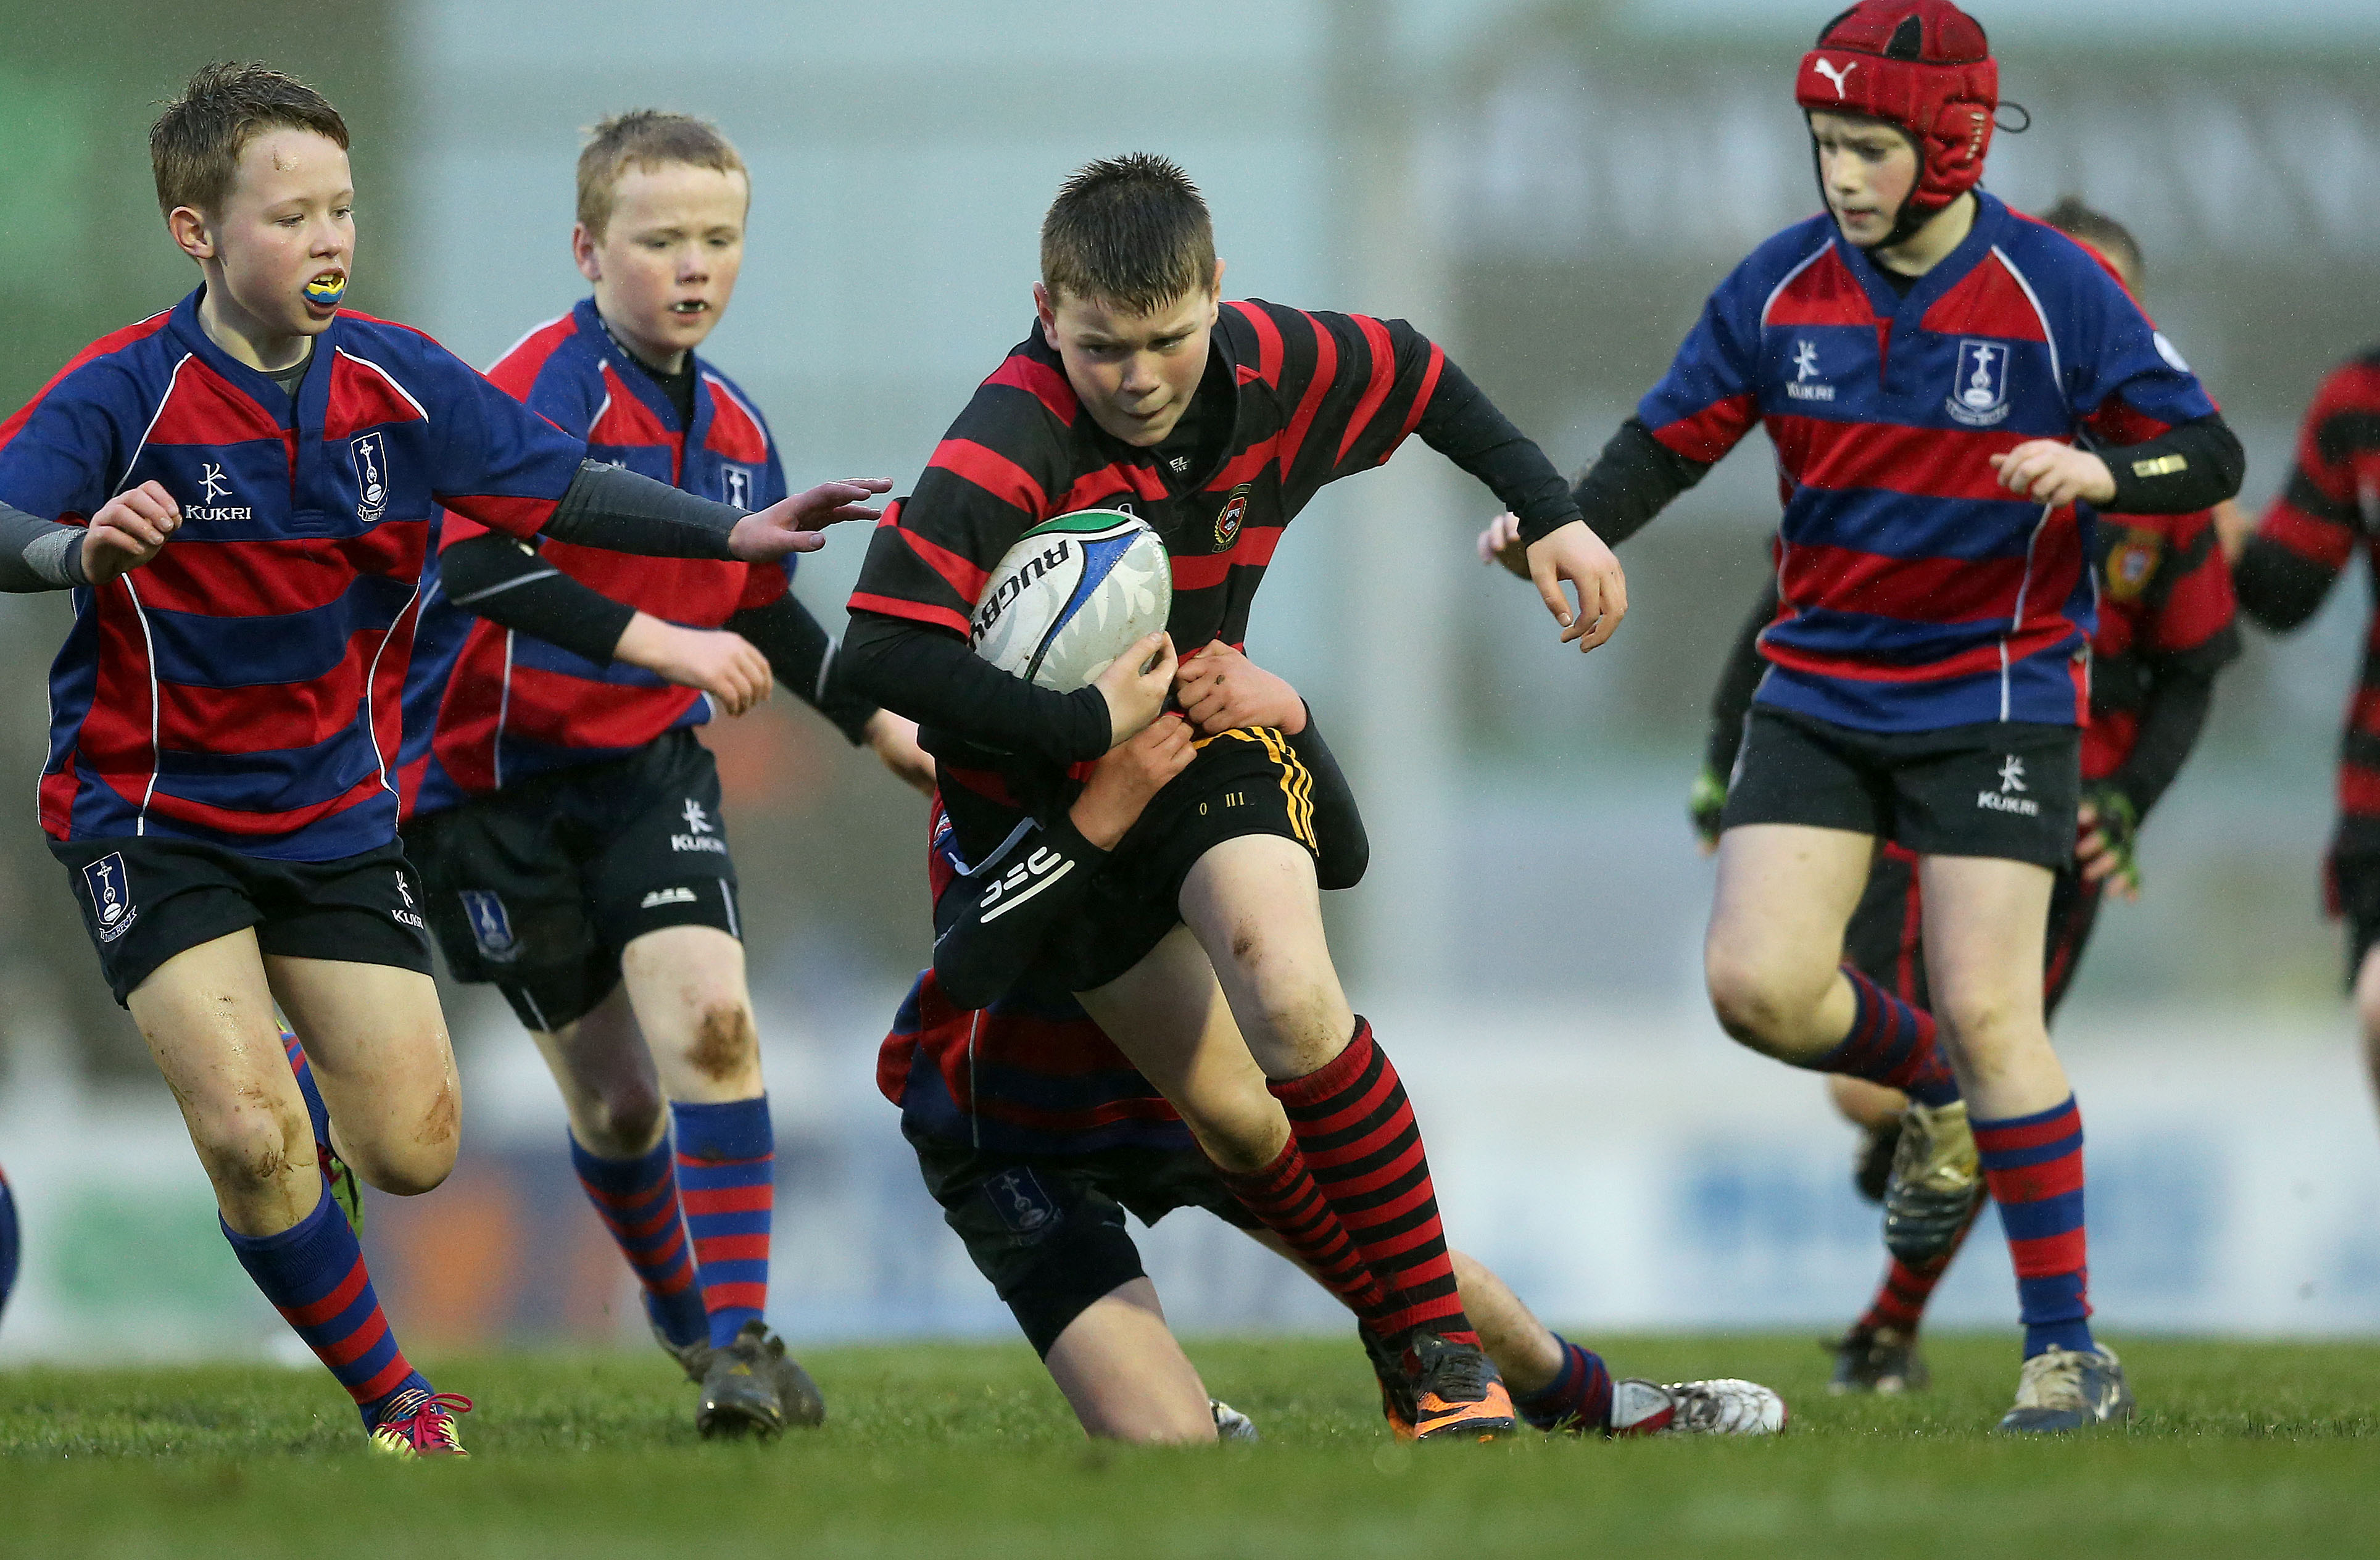 Should winning be scrapped in kids rugby?